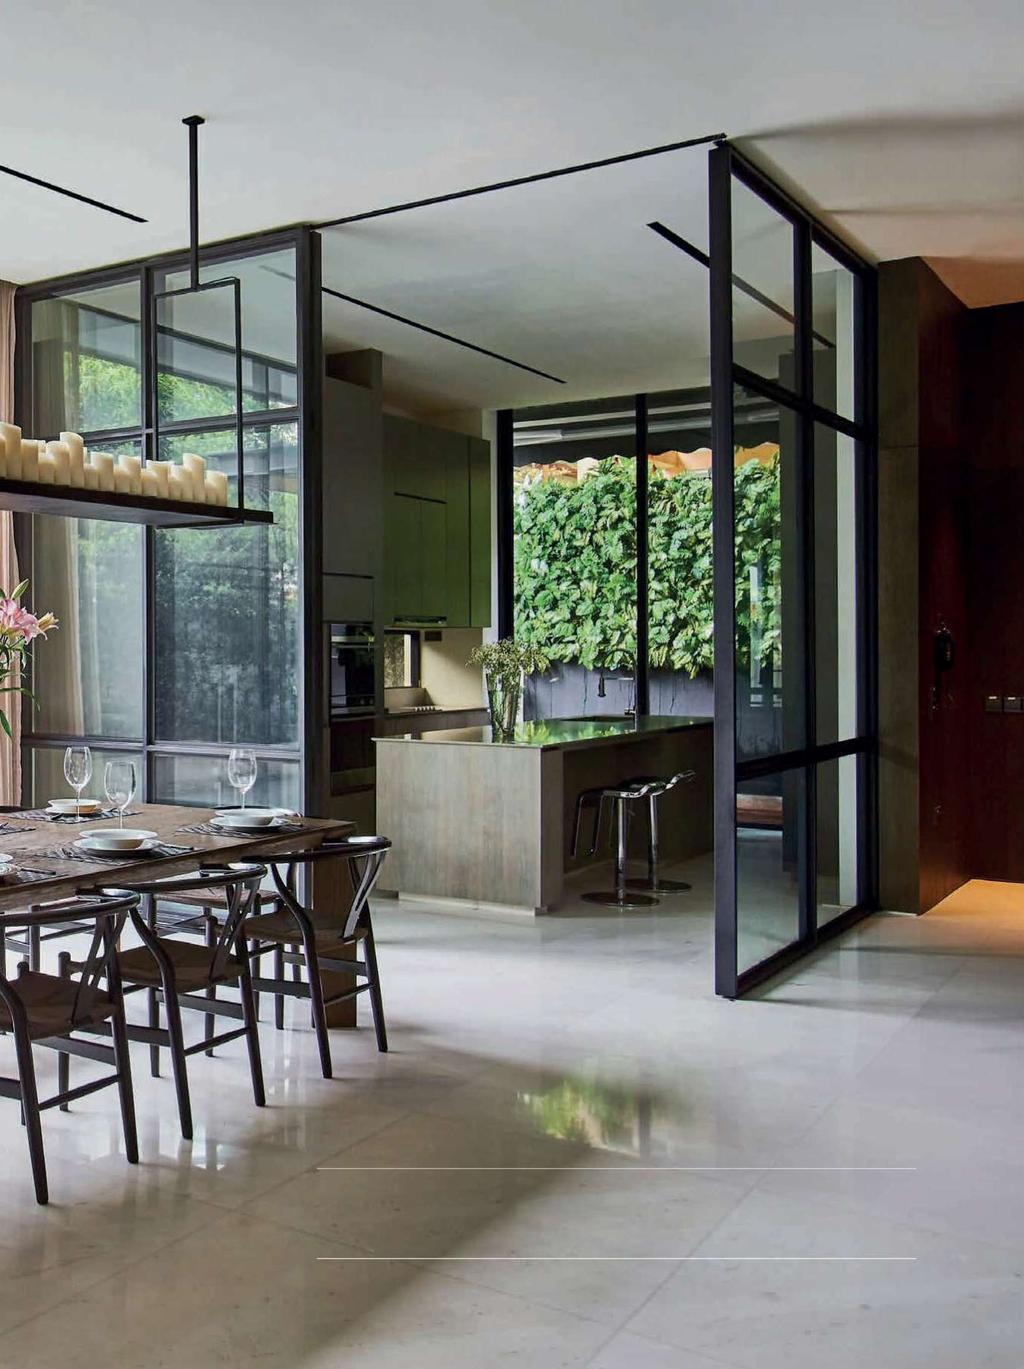 CLIENT BECAME THE FIRST PRIORITY FOR EDMUND NG WHEN HE BUILT THIS STYLISH HOUSE BY